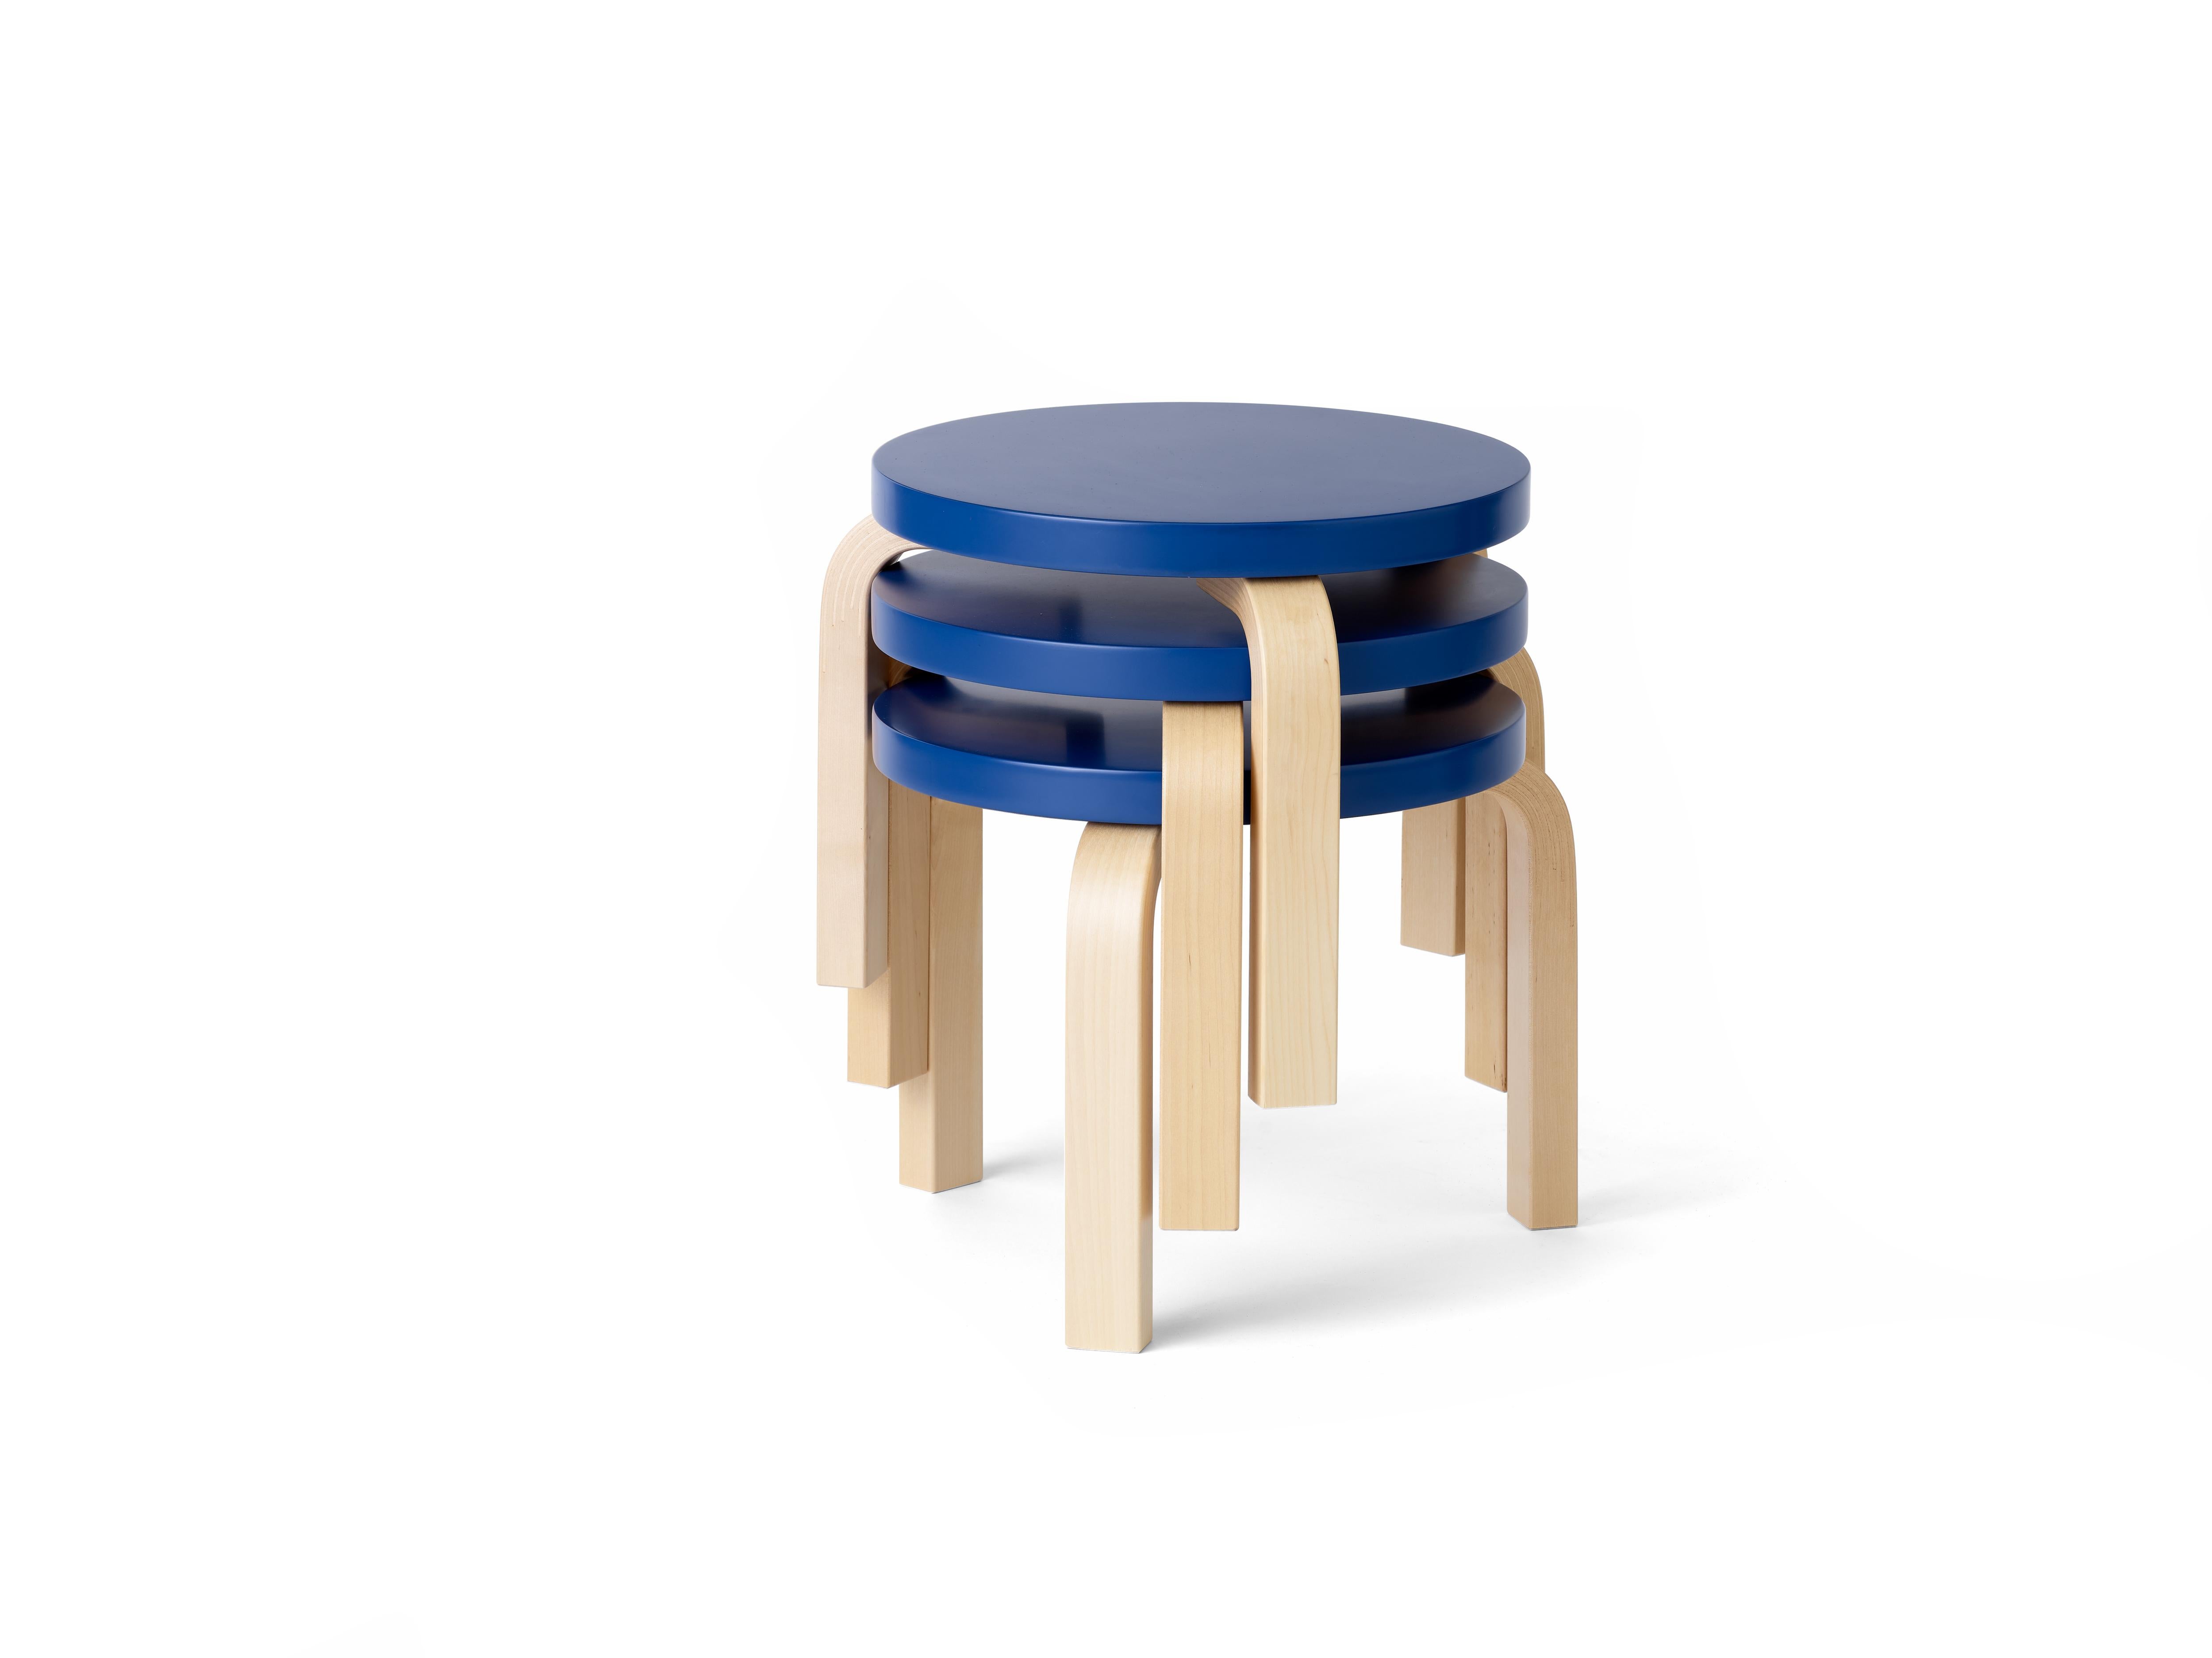 Modern Limited Edition Low Stool 60 in Moonstone by Artek and Heath